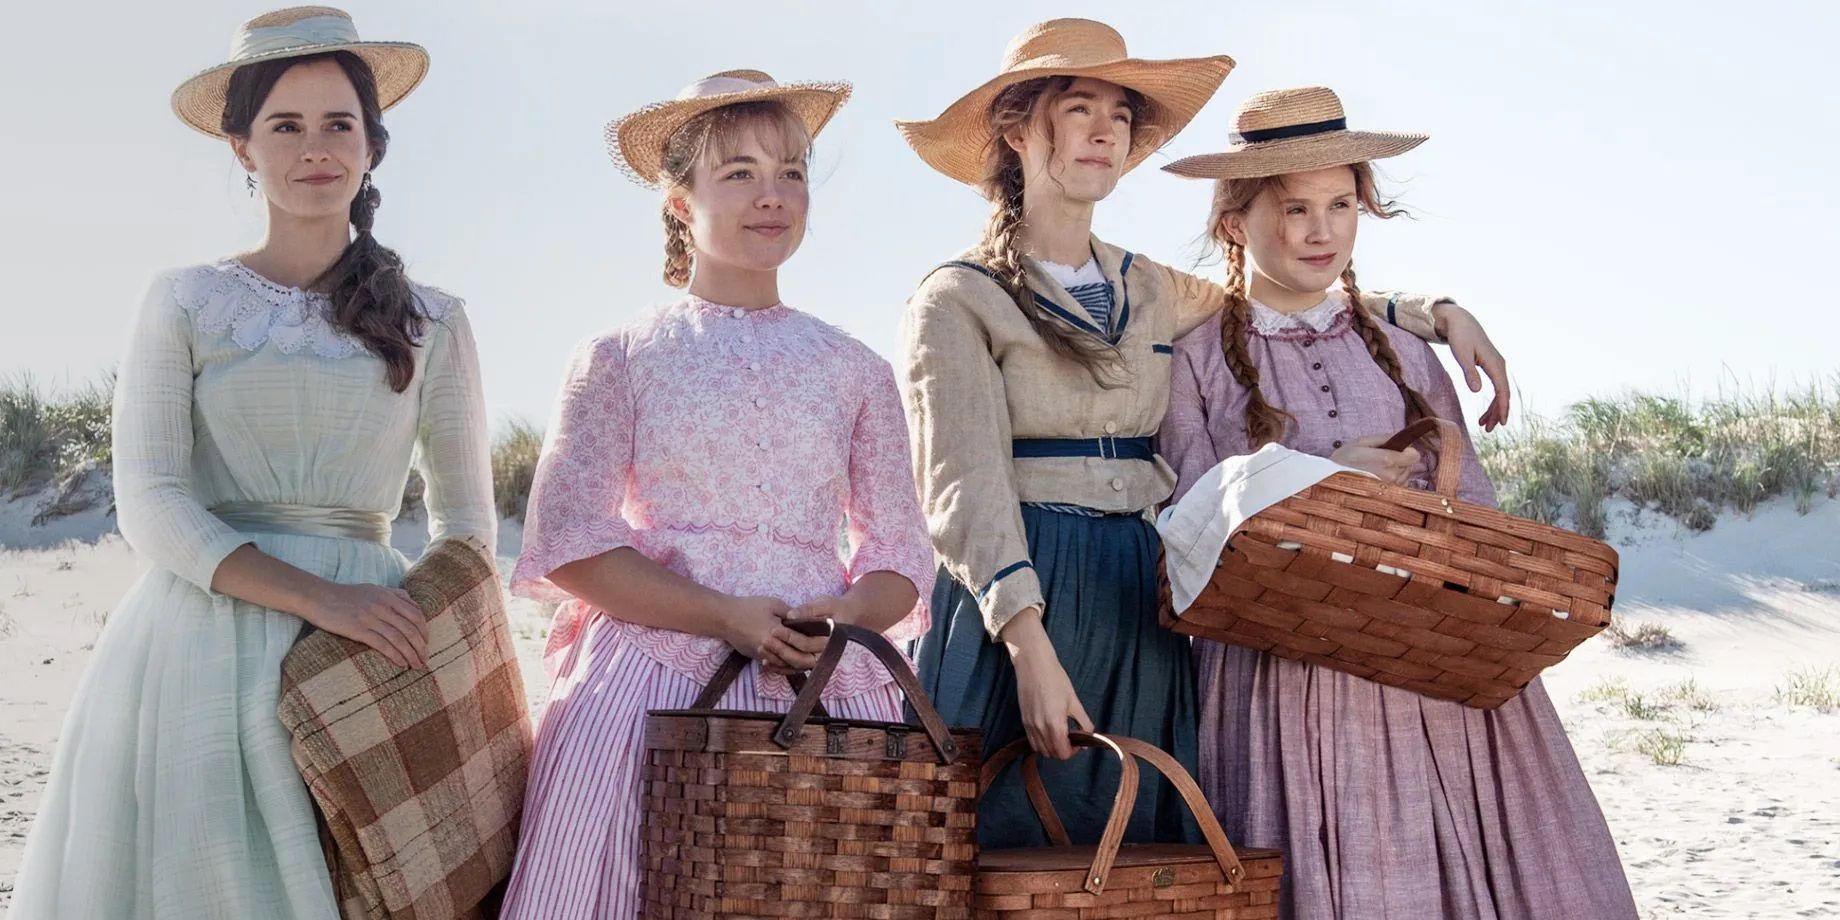 The March sisters on the beach in Little Women